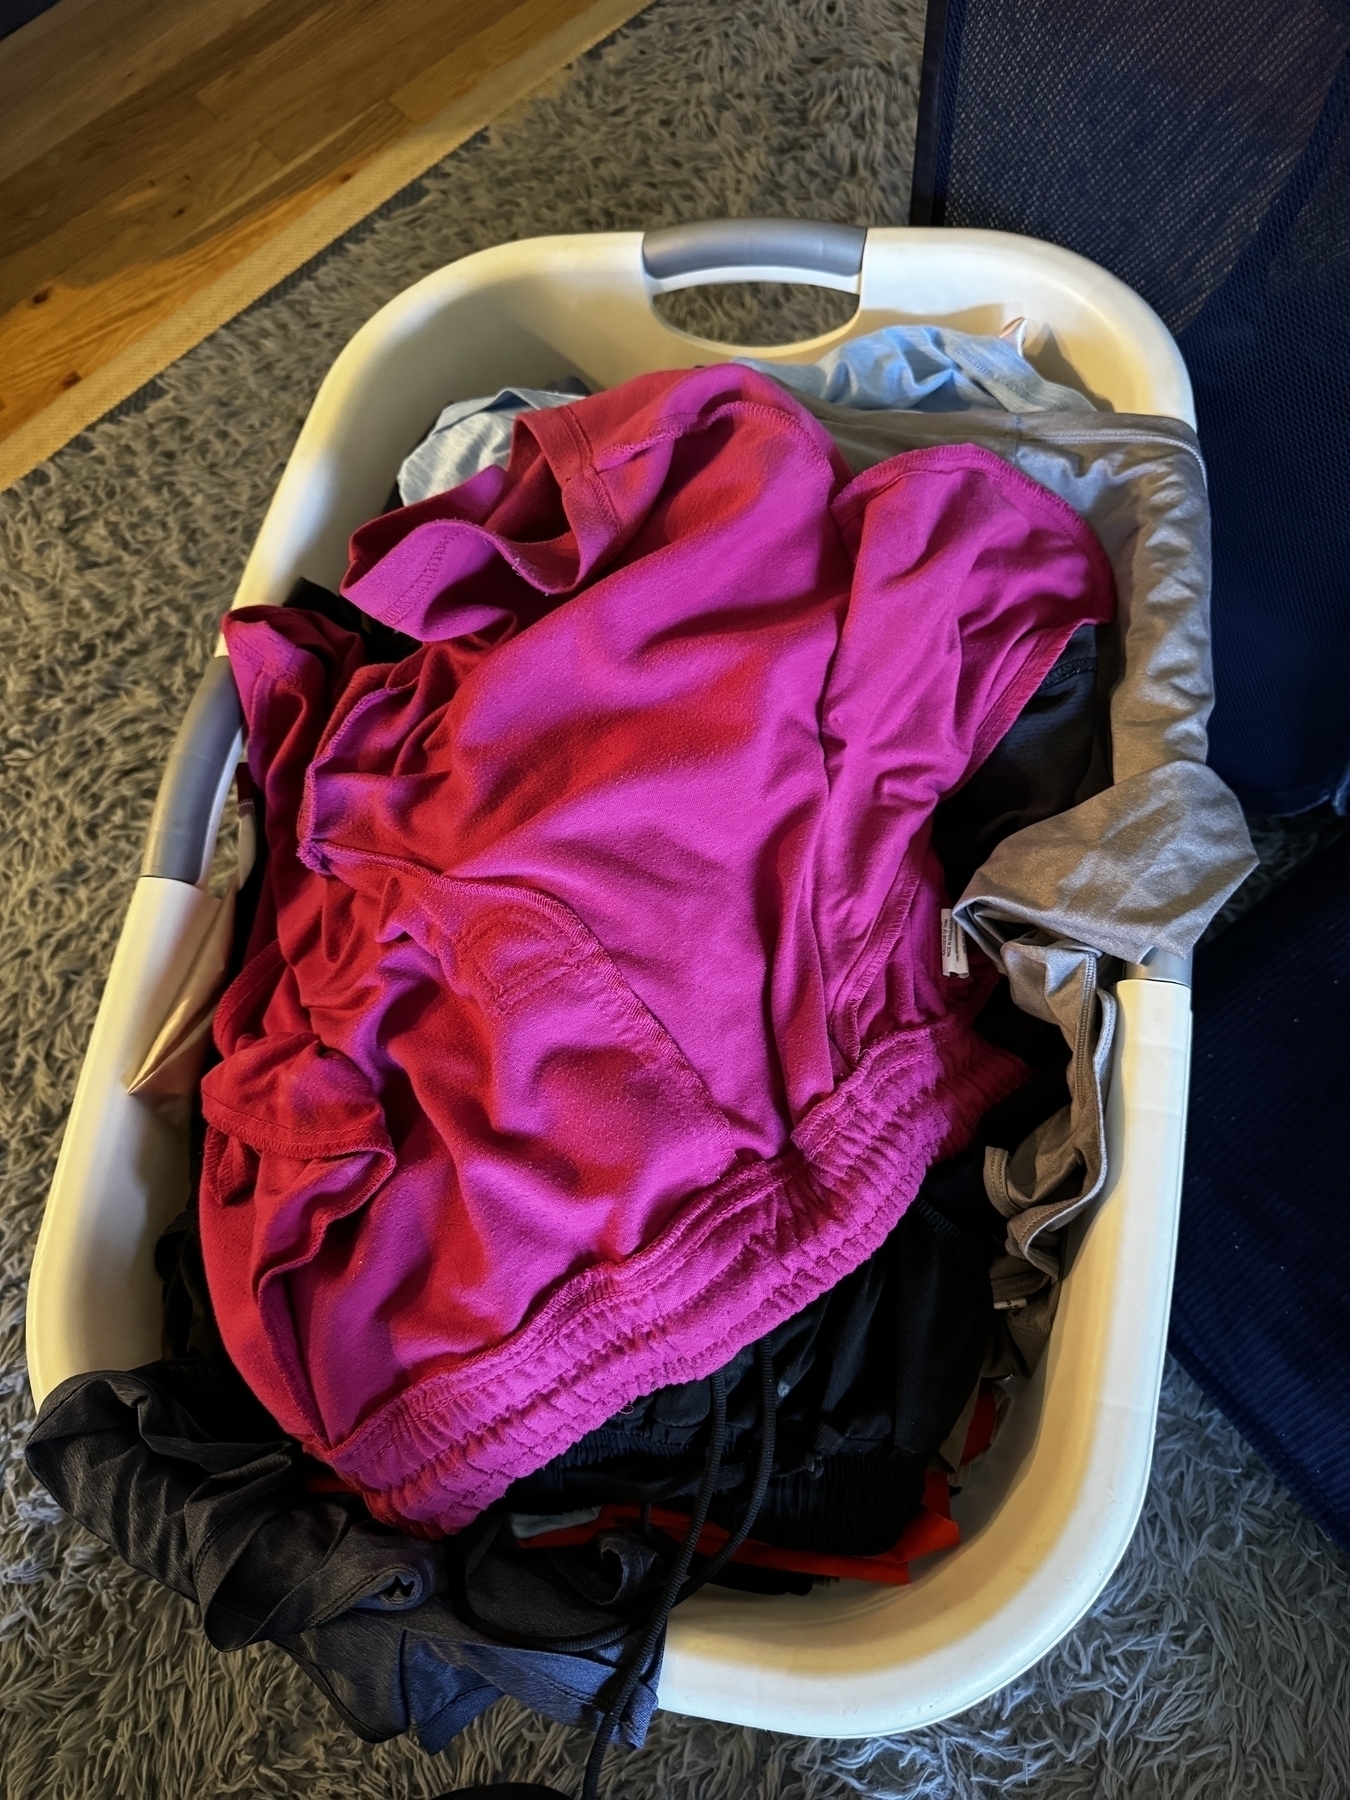  A laundry basket full of clothes, including a bright pink pair of shorts.